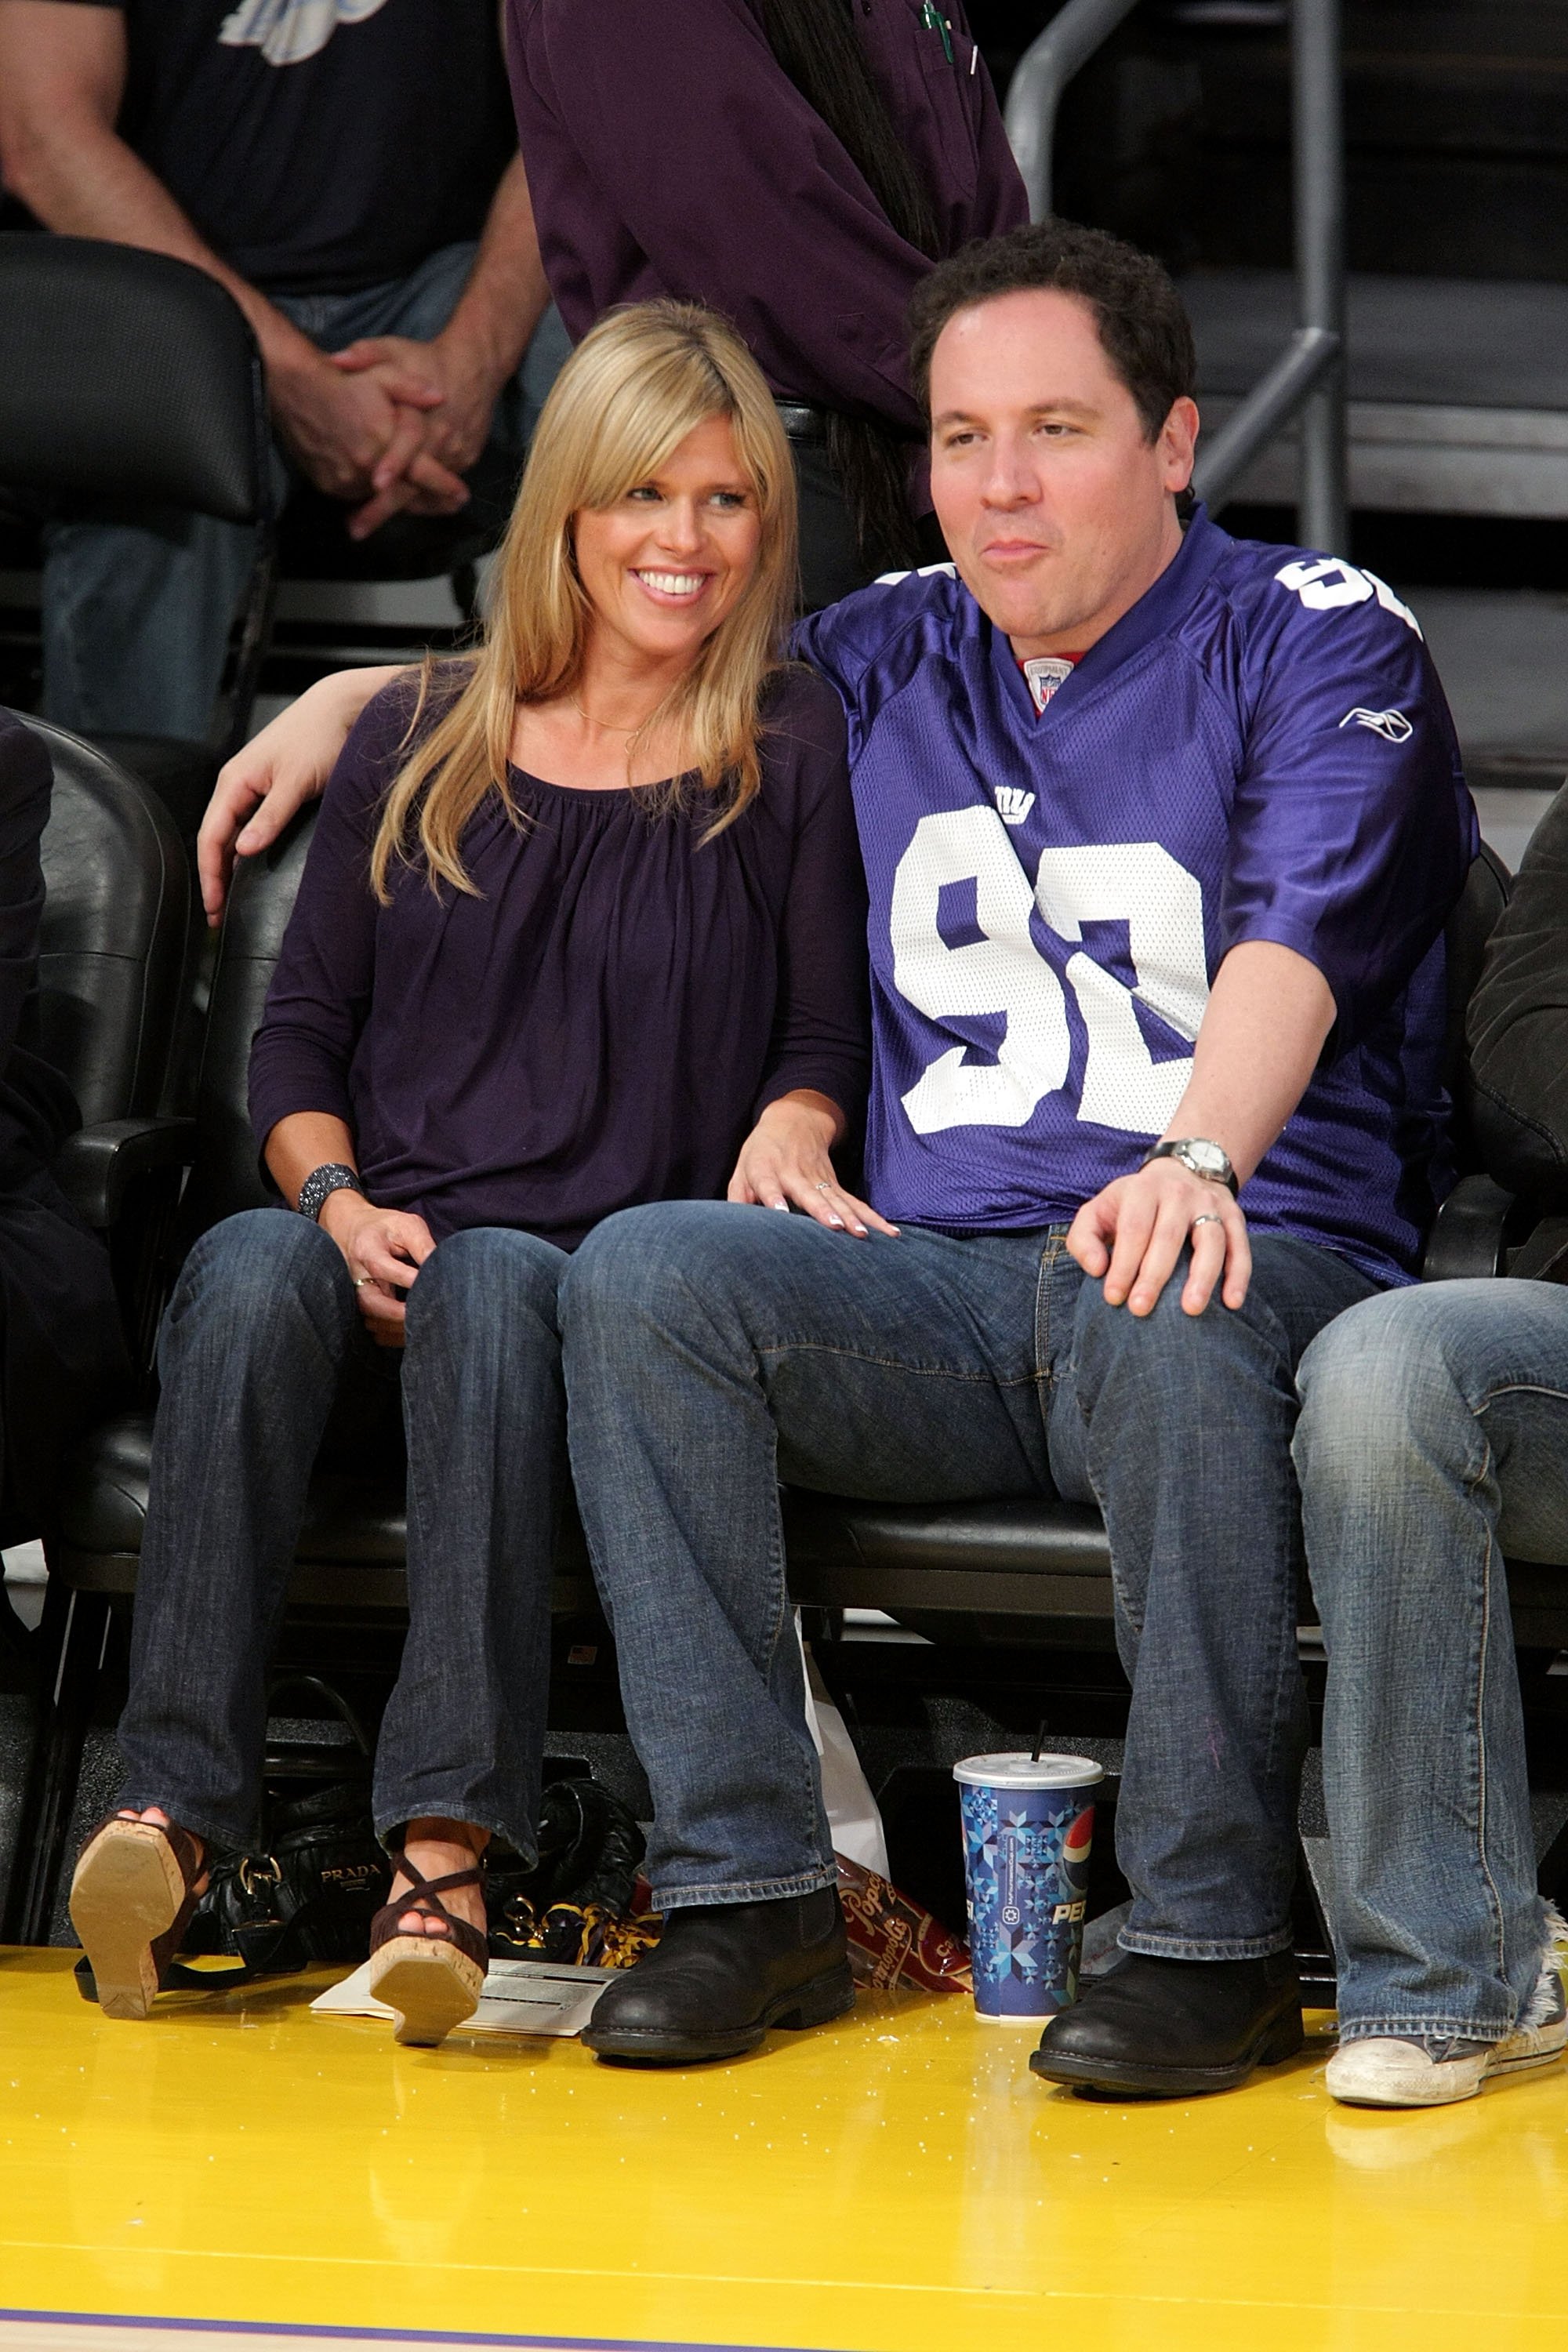 Joya Tillem and Jon Favreau watching an NBA playoff game between the Los Angeles Lakers against Utah Jazz at the Staples Center in Los Angeles, California on May 14, 2008 | Source: Getty Images